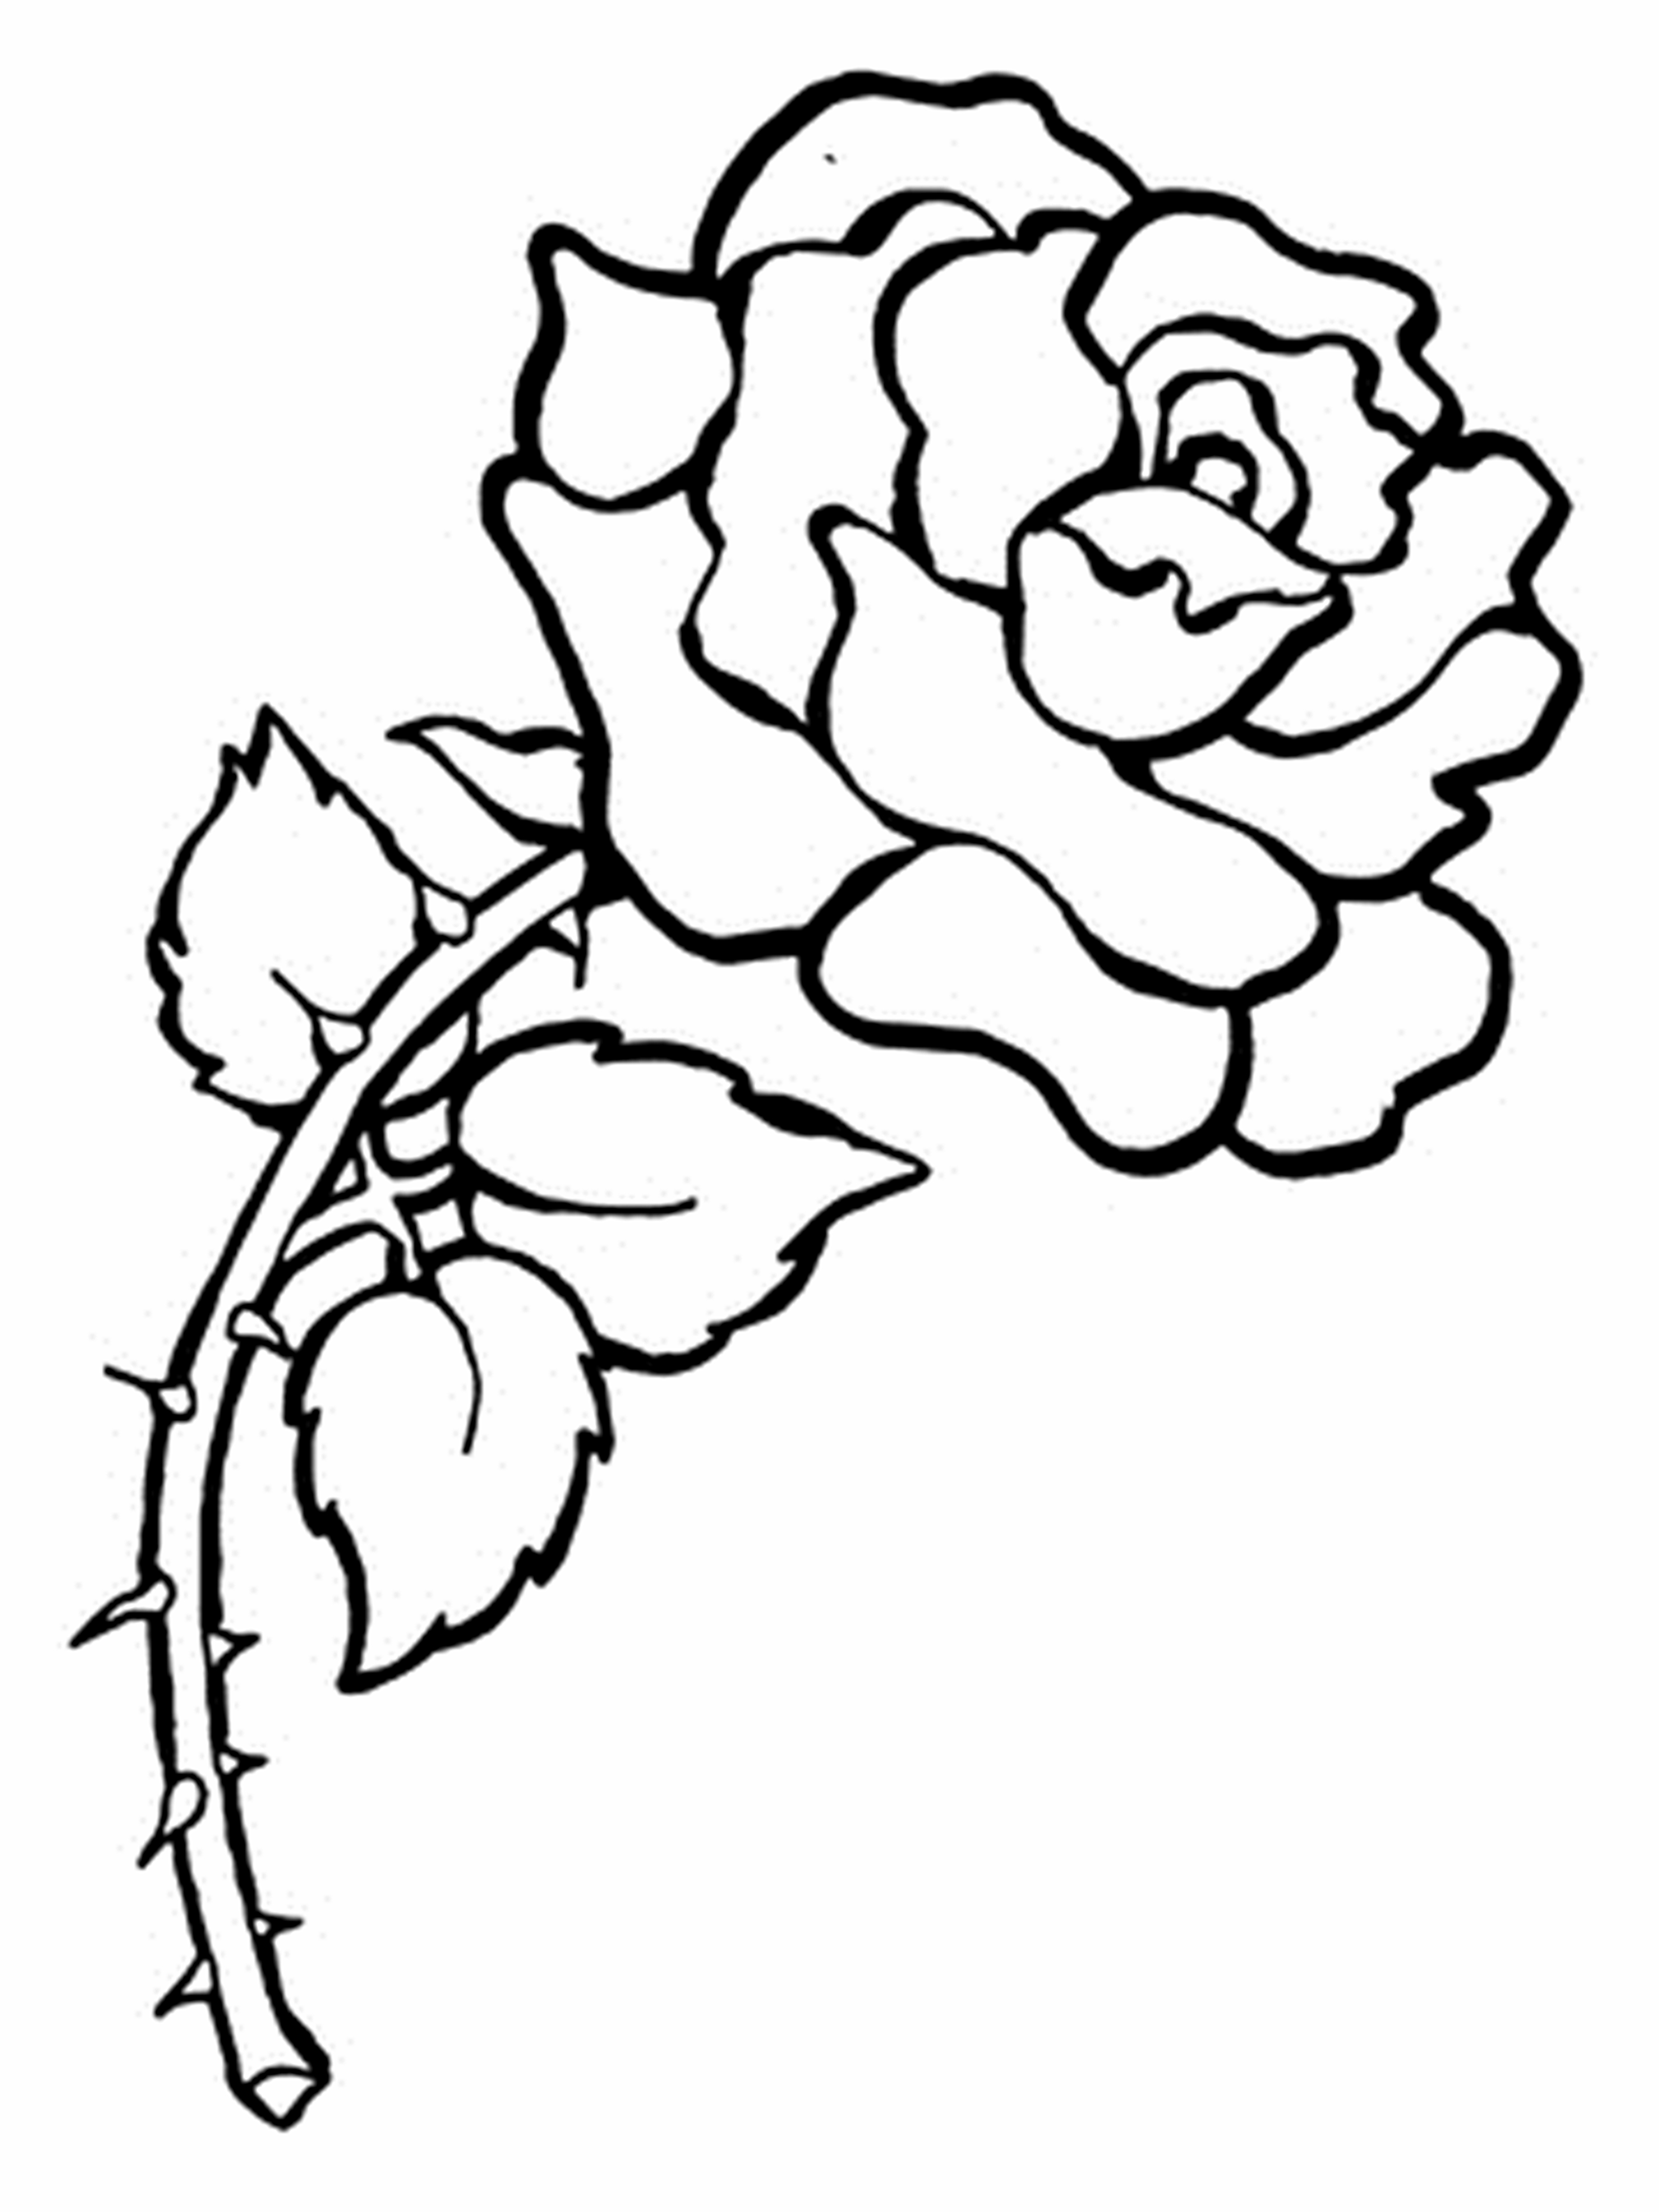 Download Free Printable Flower Coloring Pages For Kids - Best ...